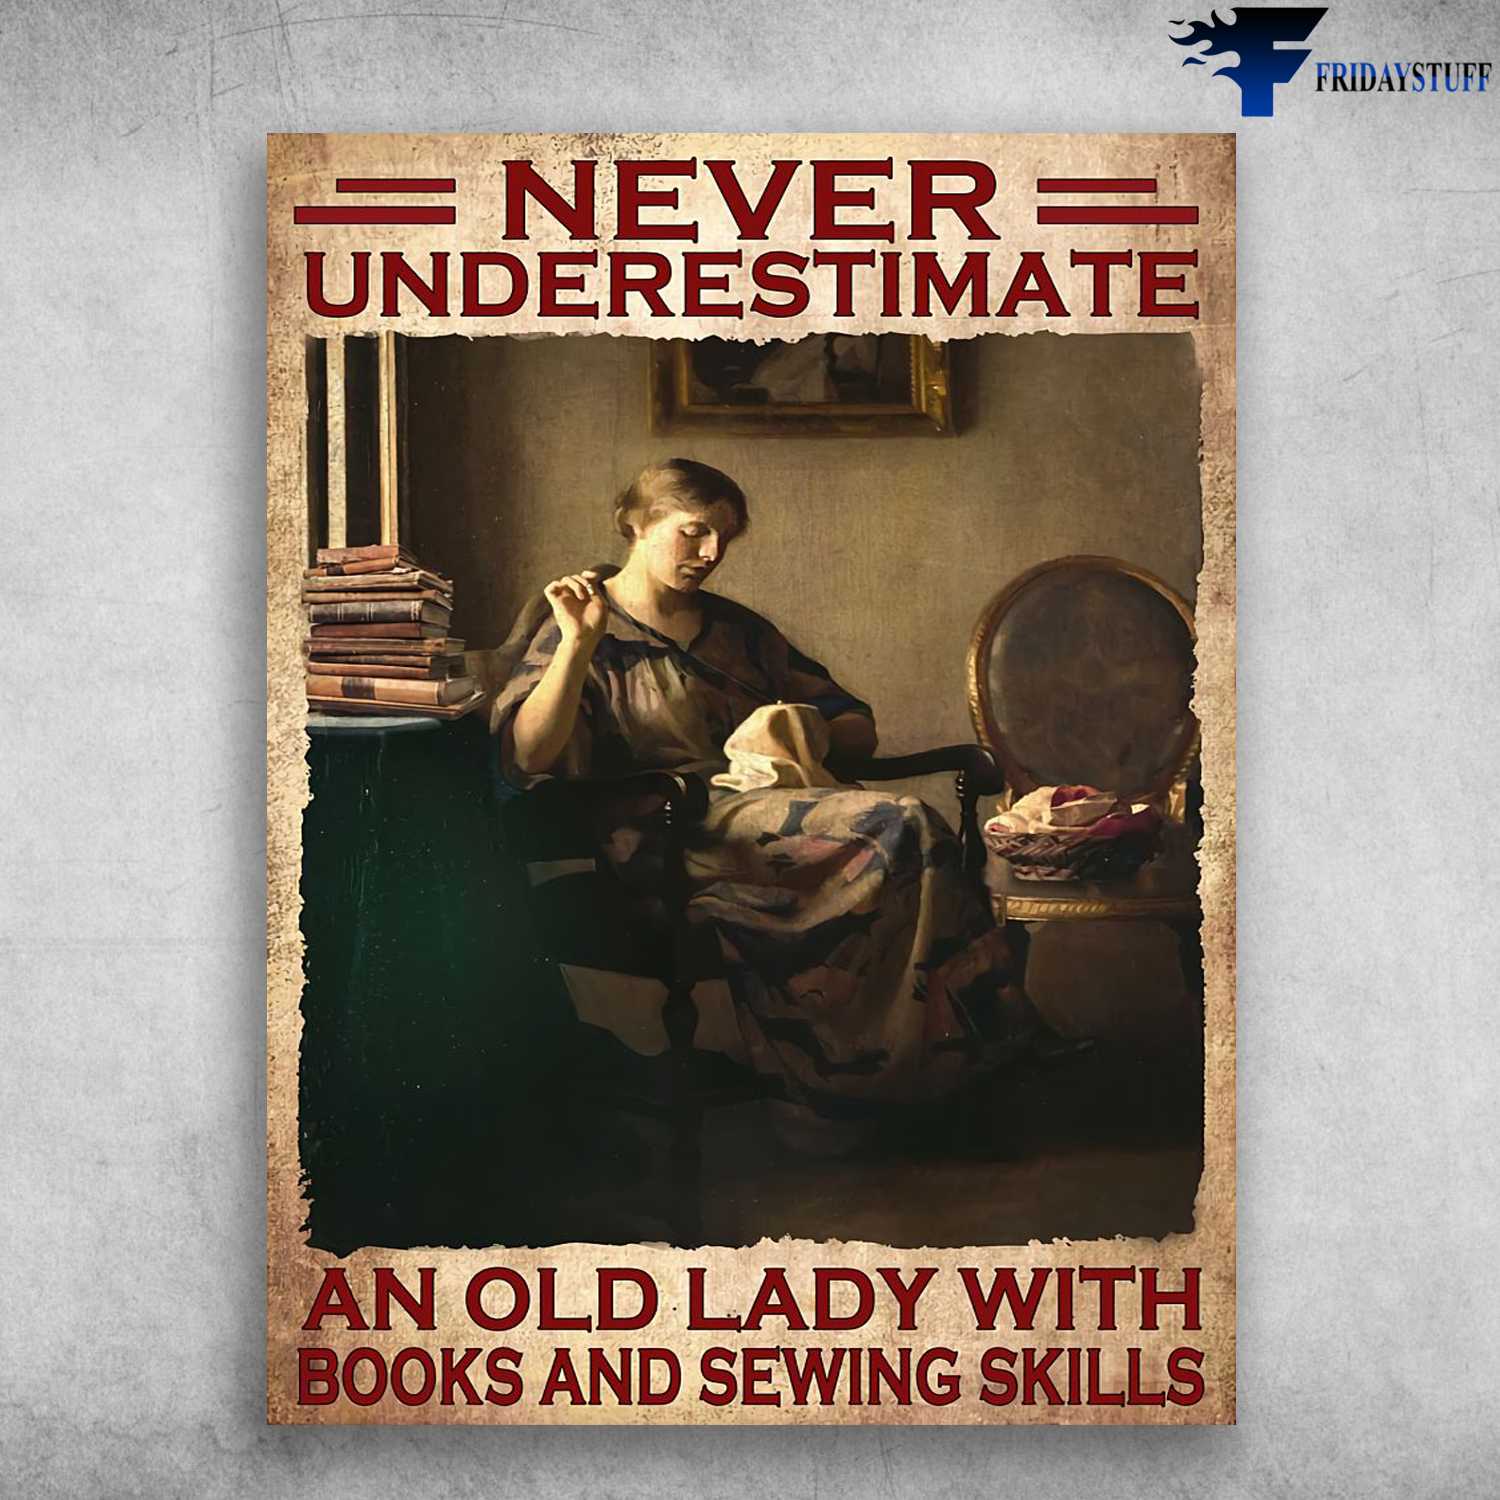 Sewing Lady - Never Underestimate, An Old Lady With, Books And Sewing Skills